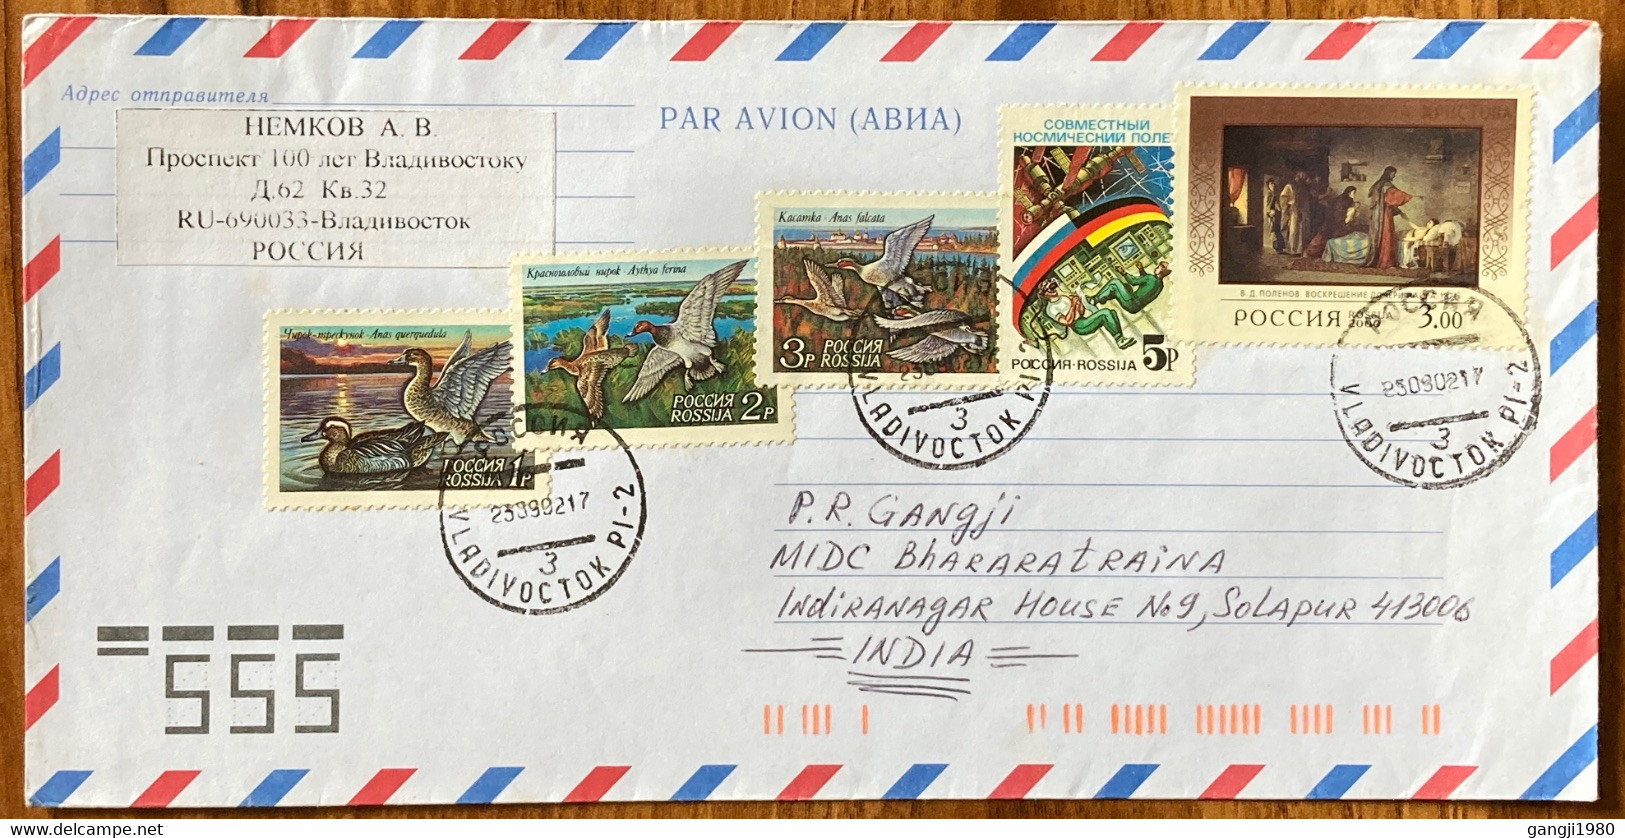 RUSSIA,2002,USED COVER TO INDIA,5 STAMPS,BIRD,SPACE,WALK,ASTRONAUT,ART,PAINTING, VLADIVOSTOK CITY CANCELLATION. - Lettres & Documents